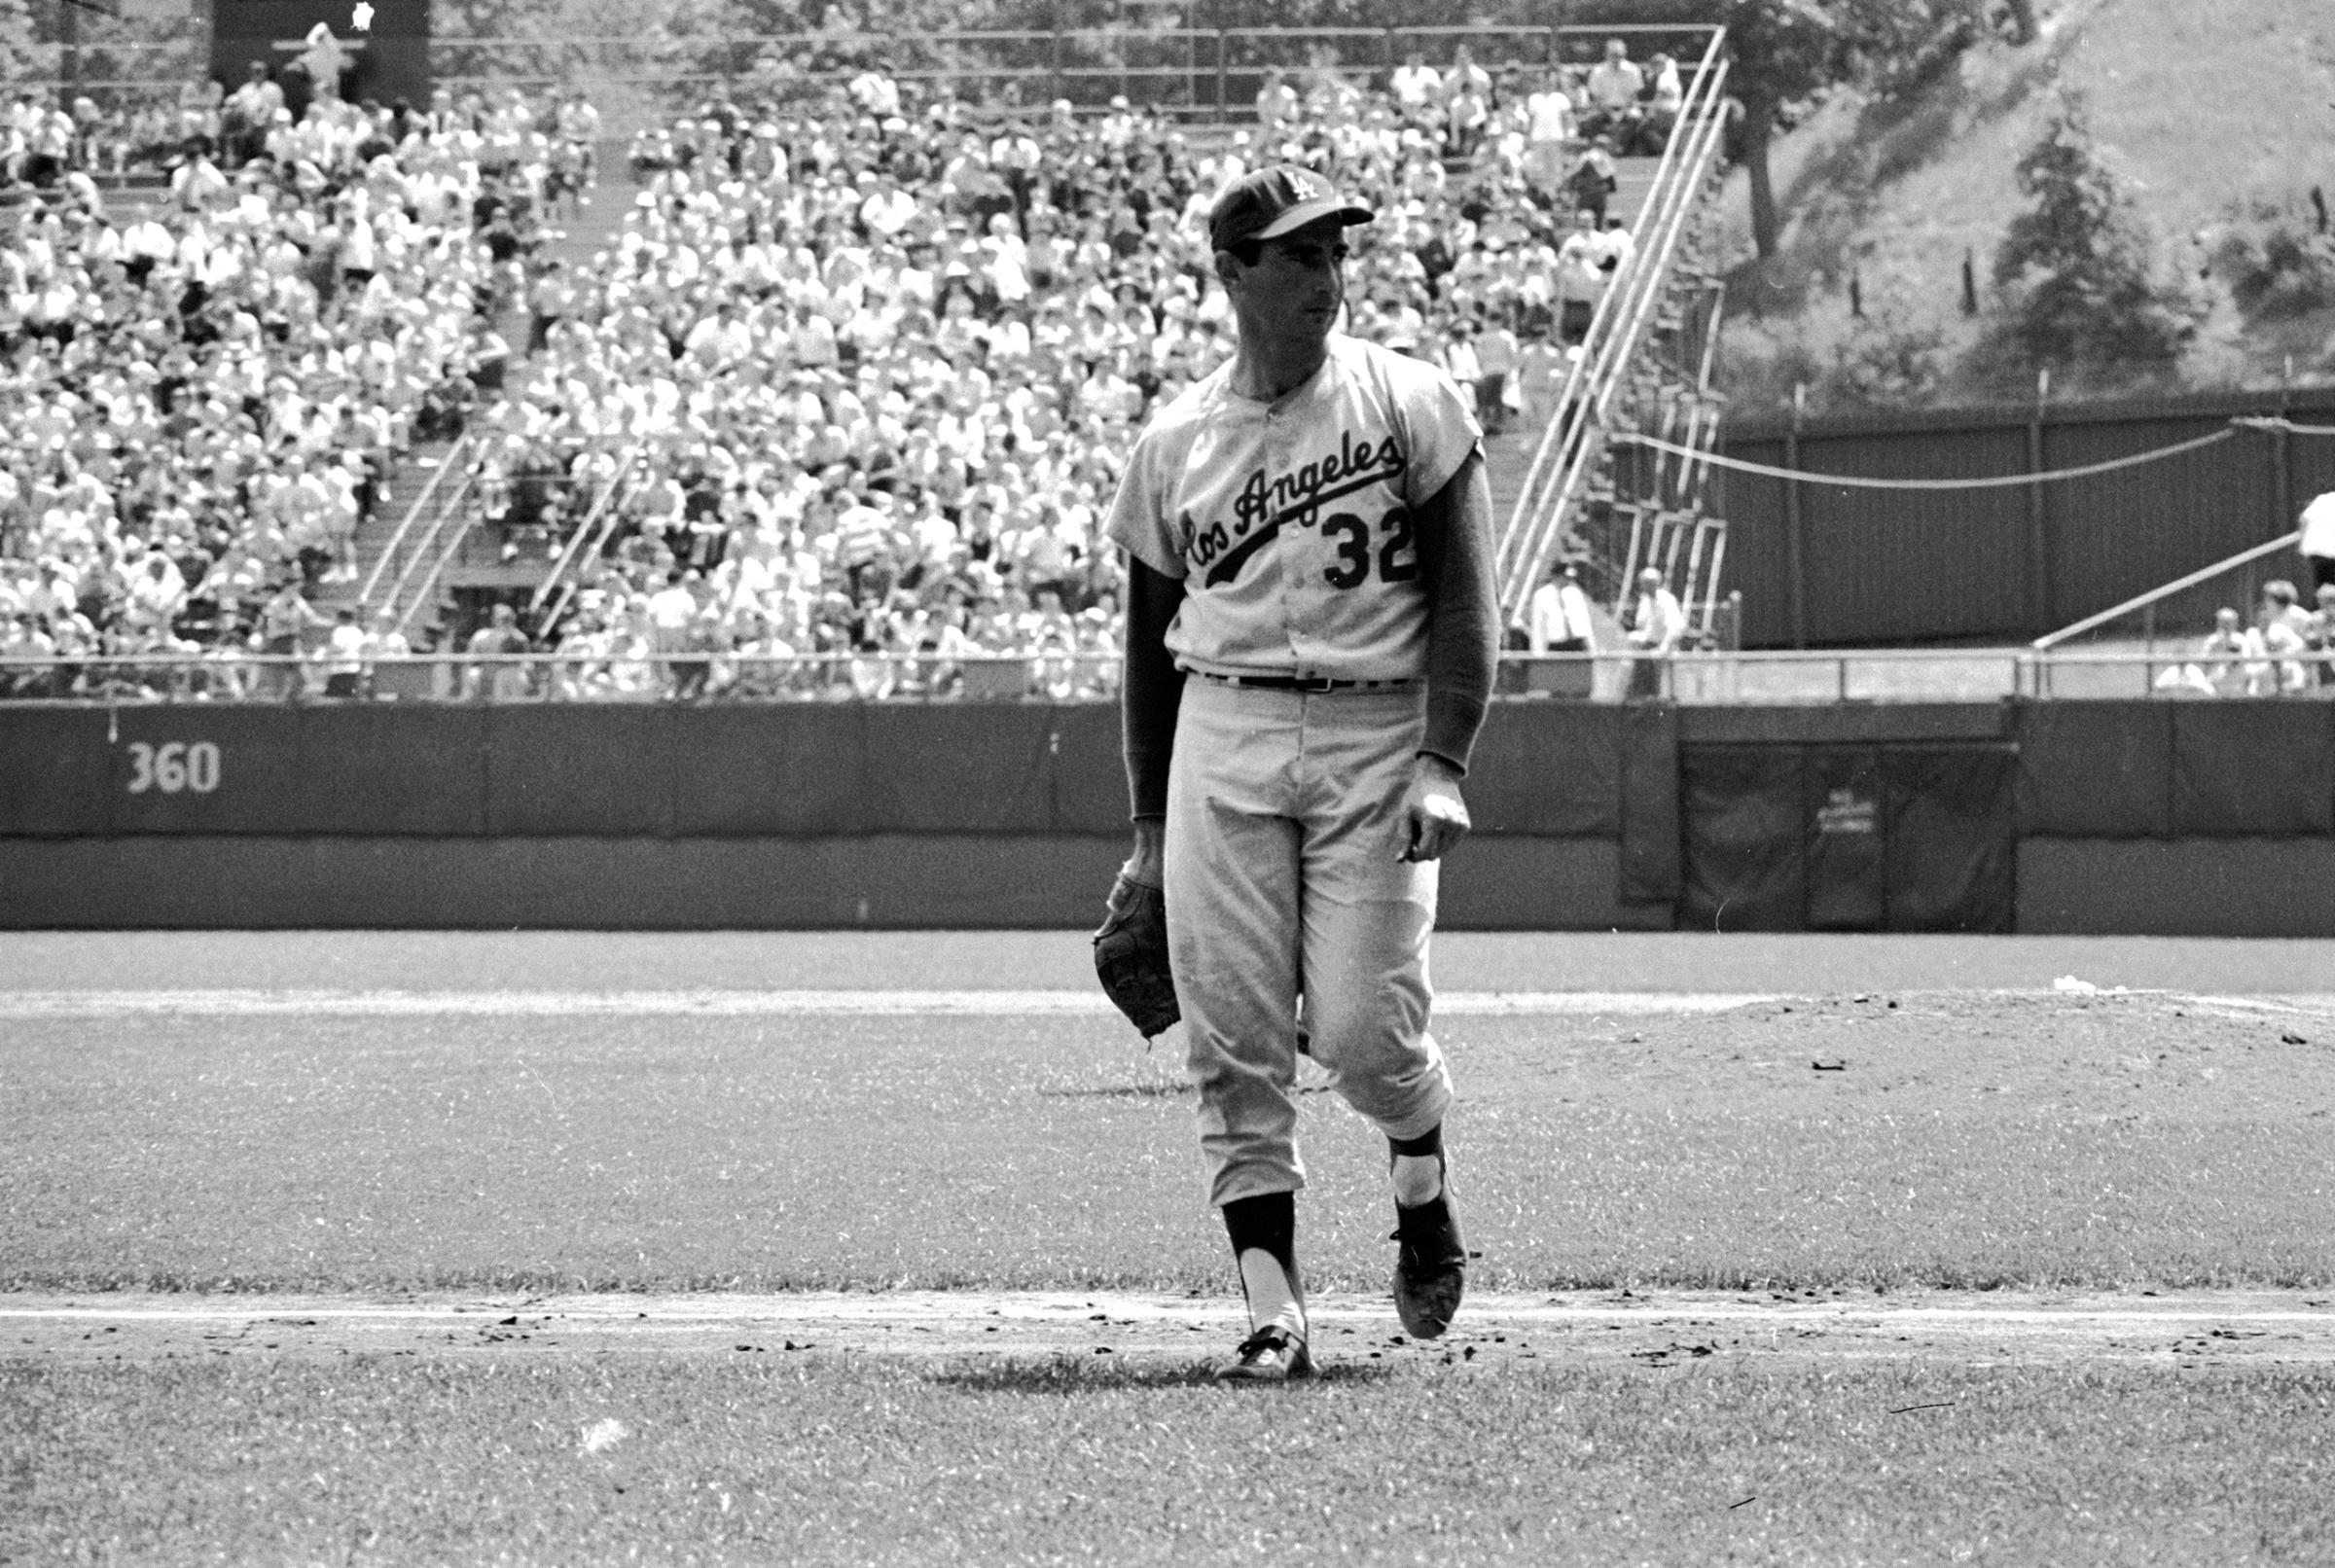 Los Angeles Dodgers pitcher Sandy Koufax taking the field during a game against the Milwaukee Braves, 1963.